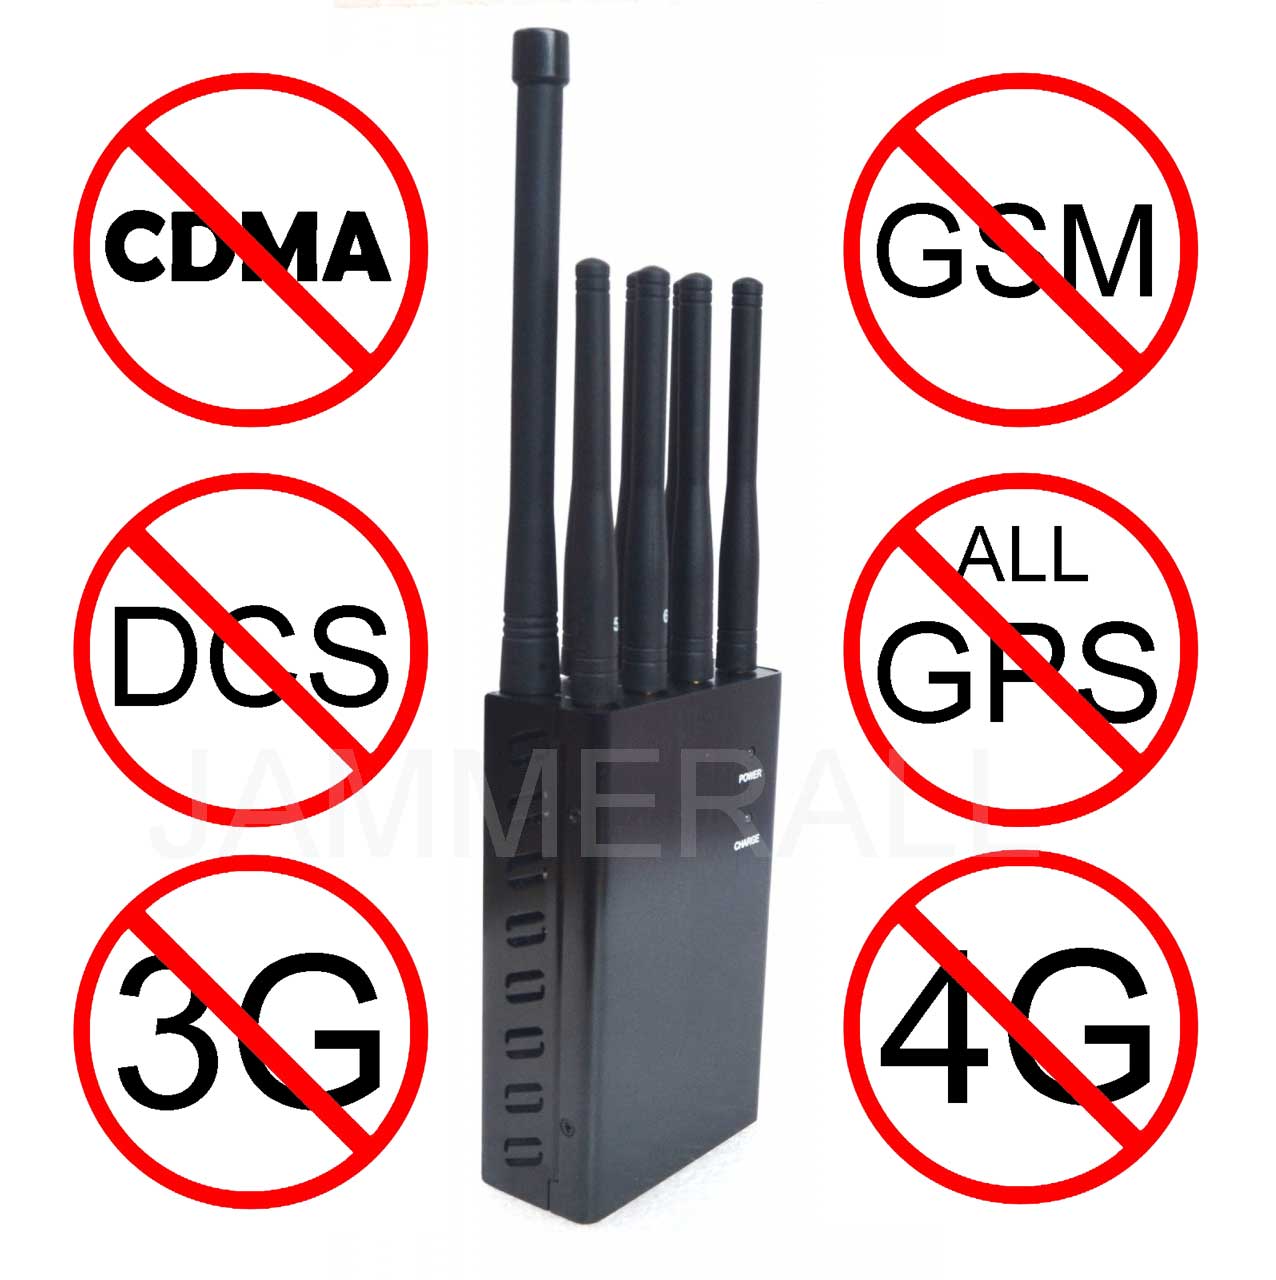 Portable 8 Bands 3G 4G All Cellphone & All GPS Signal Jammer for Sales